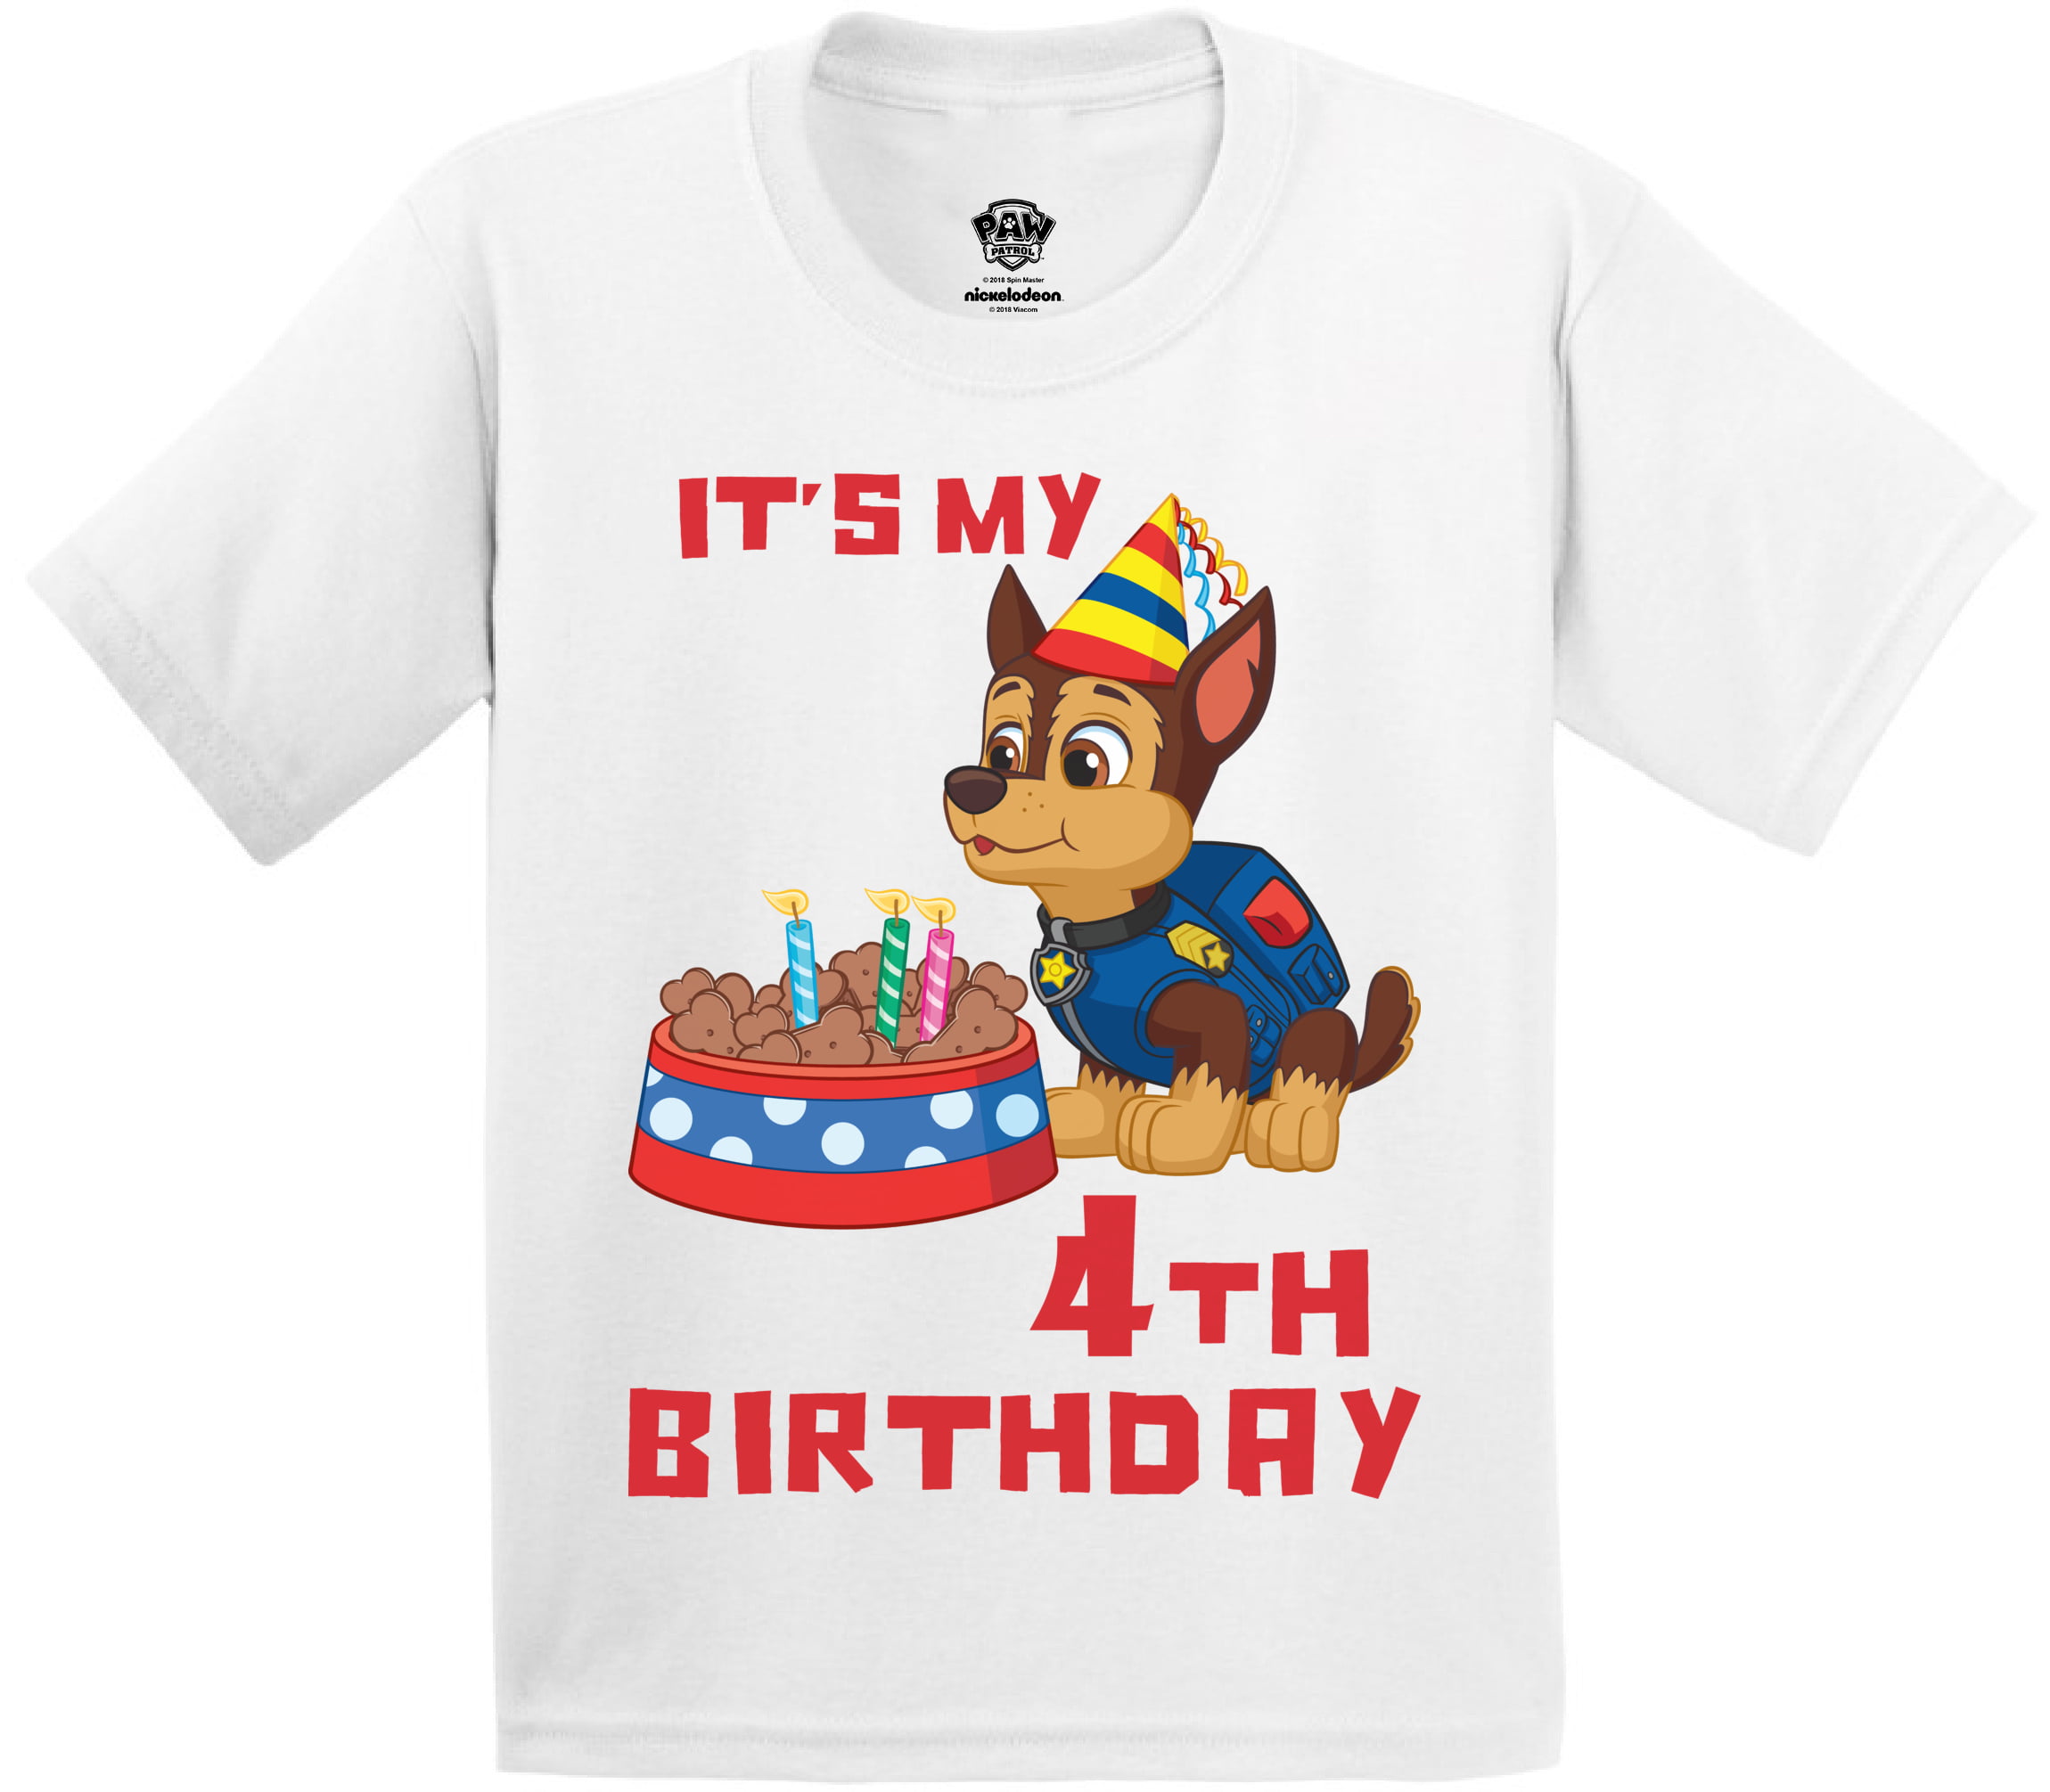 Paw patrol birthday T-shirt featuring chase/personalised/kids/toddler/baby/child 